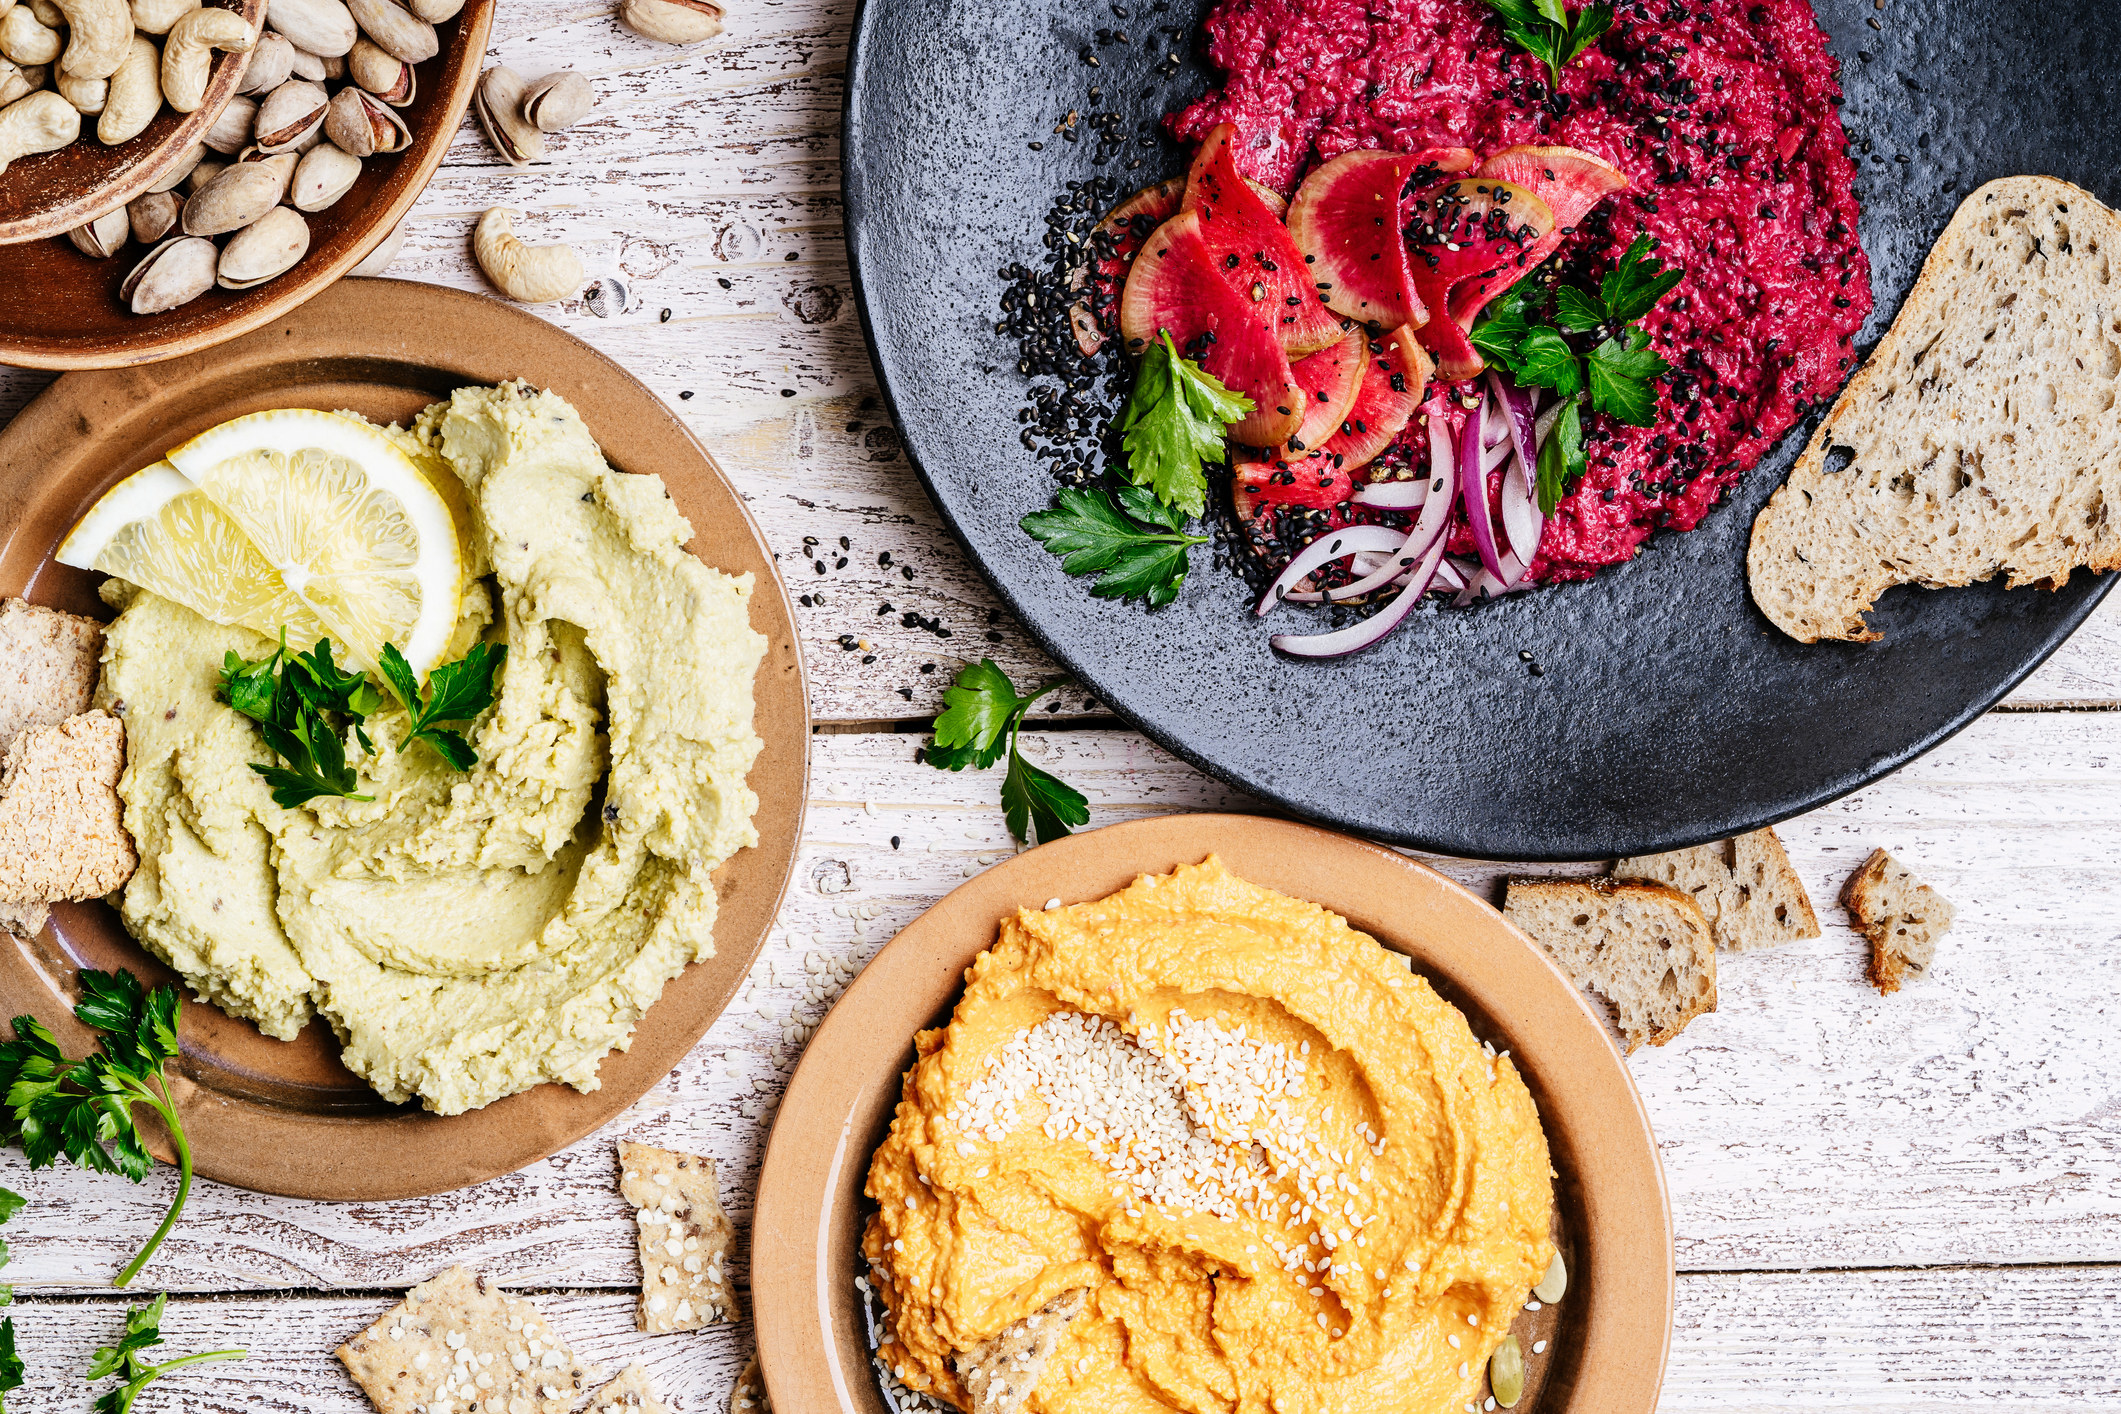 Different flavors of hummus in bowls